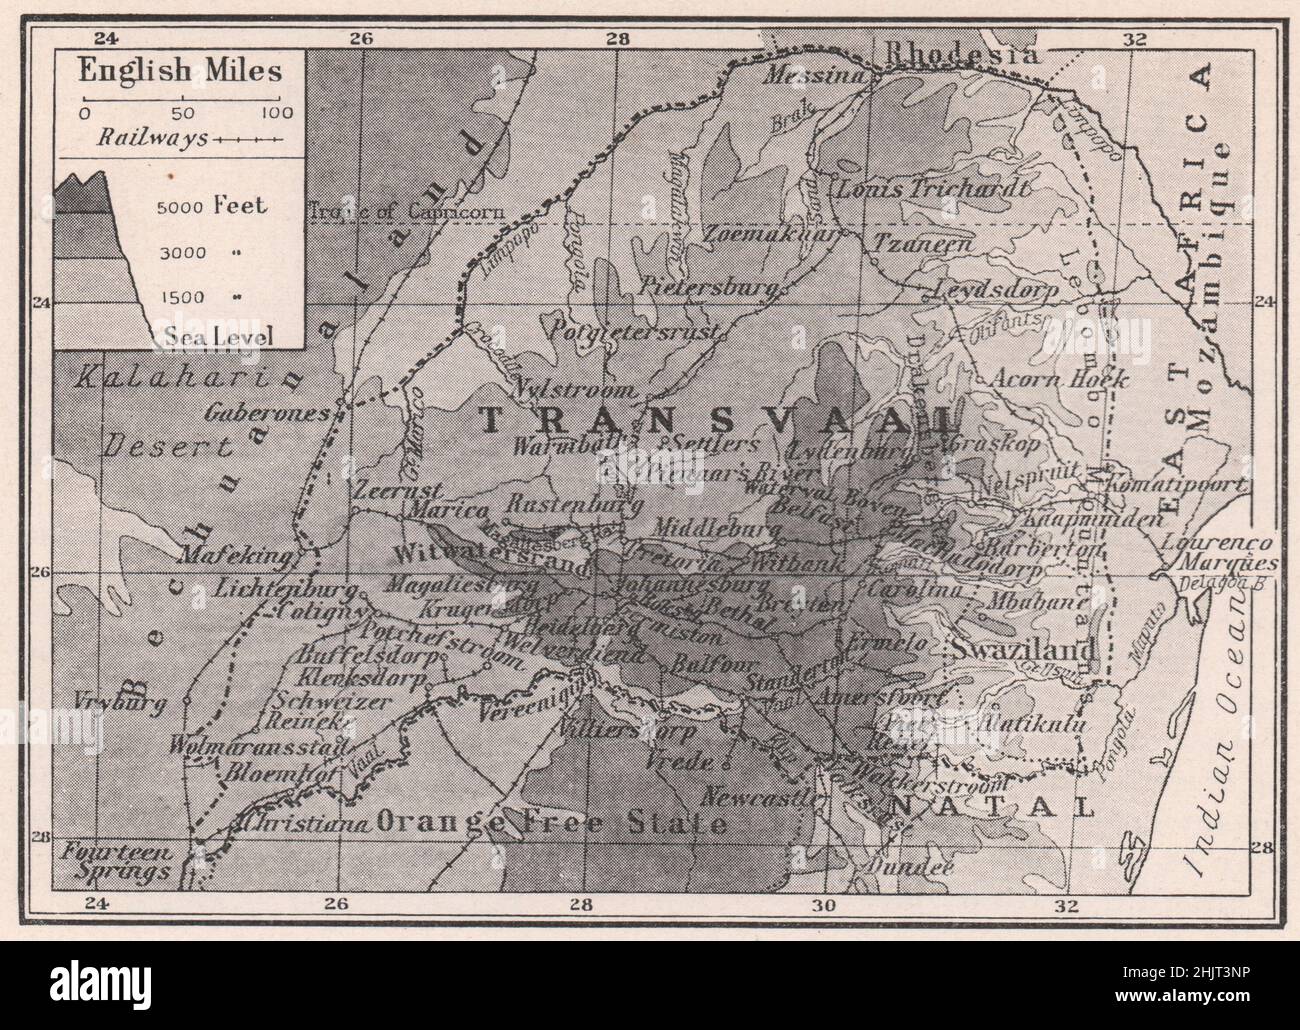 A land of mines between the Vaal and Limpopo. South Africa. Transvaal  (1923 map) Stock Photo